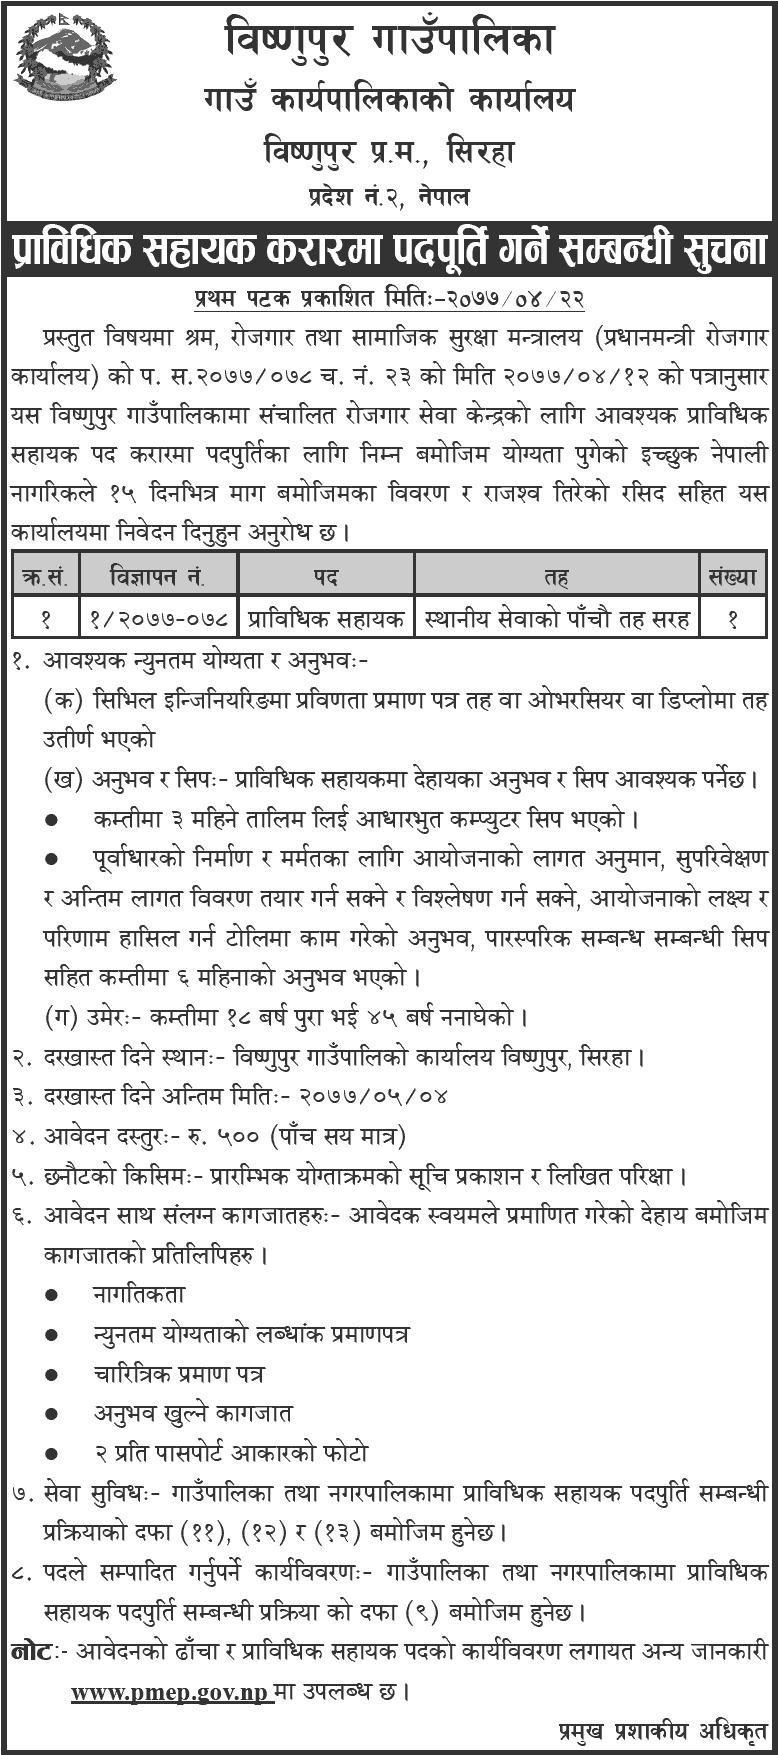 Bishnupur Rural Municipality Siraha Vacancy for Technical Assistant